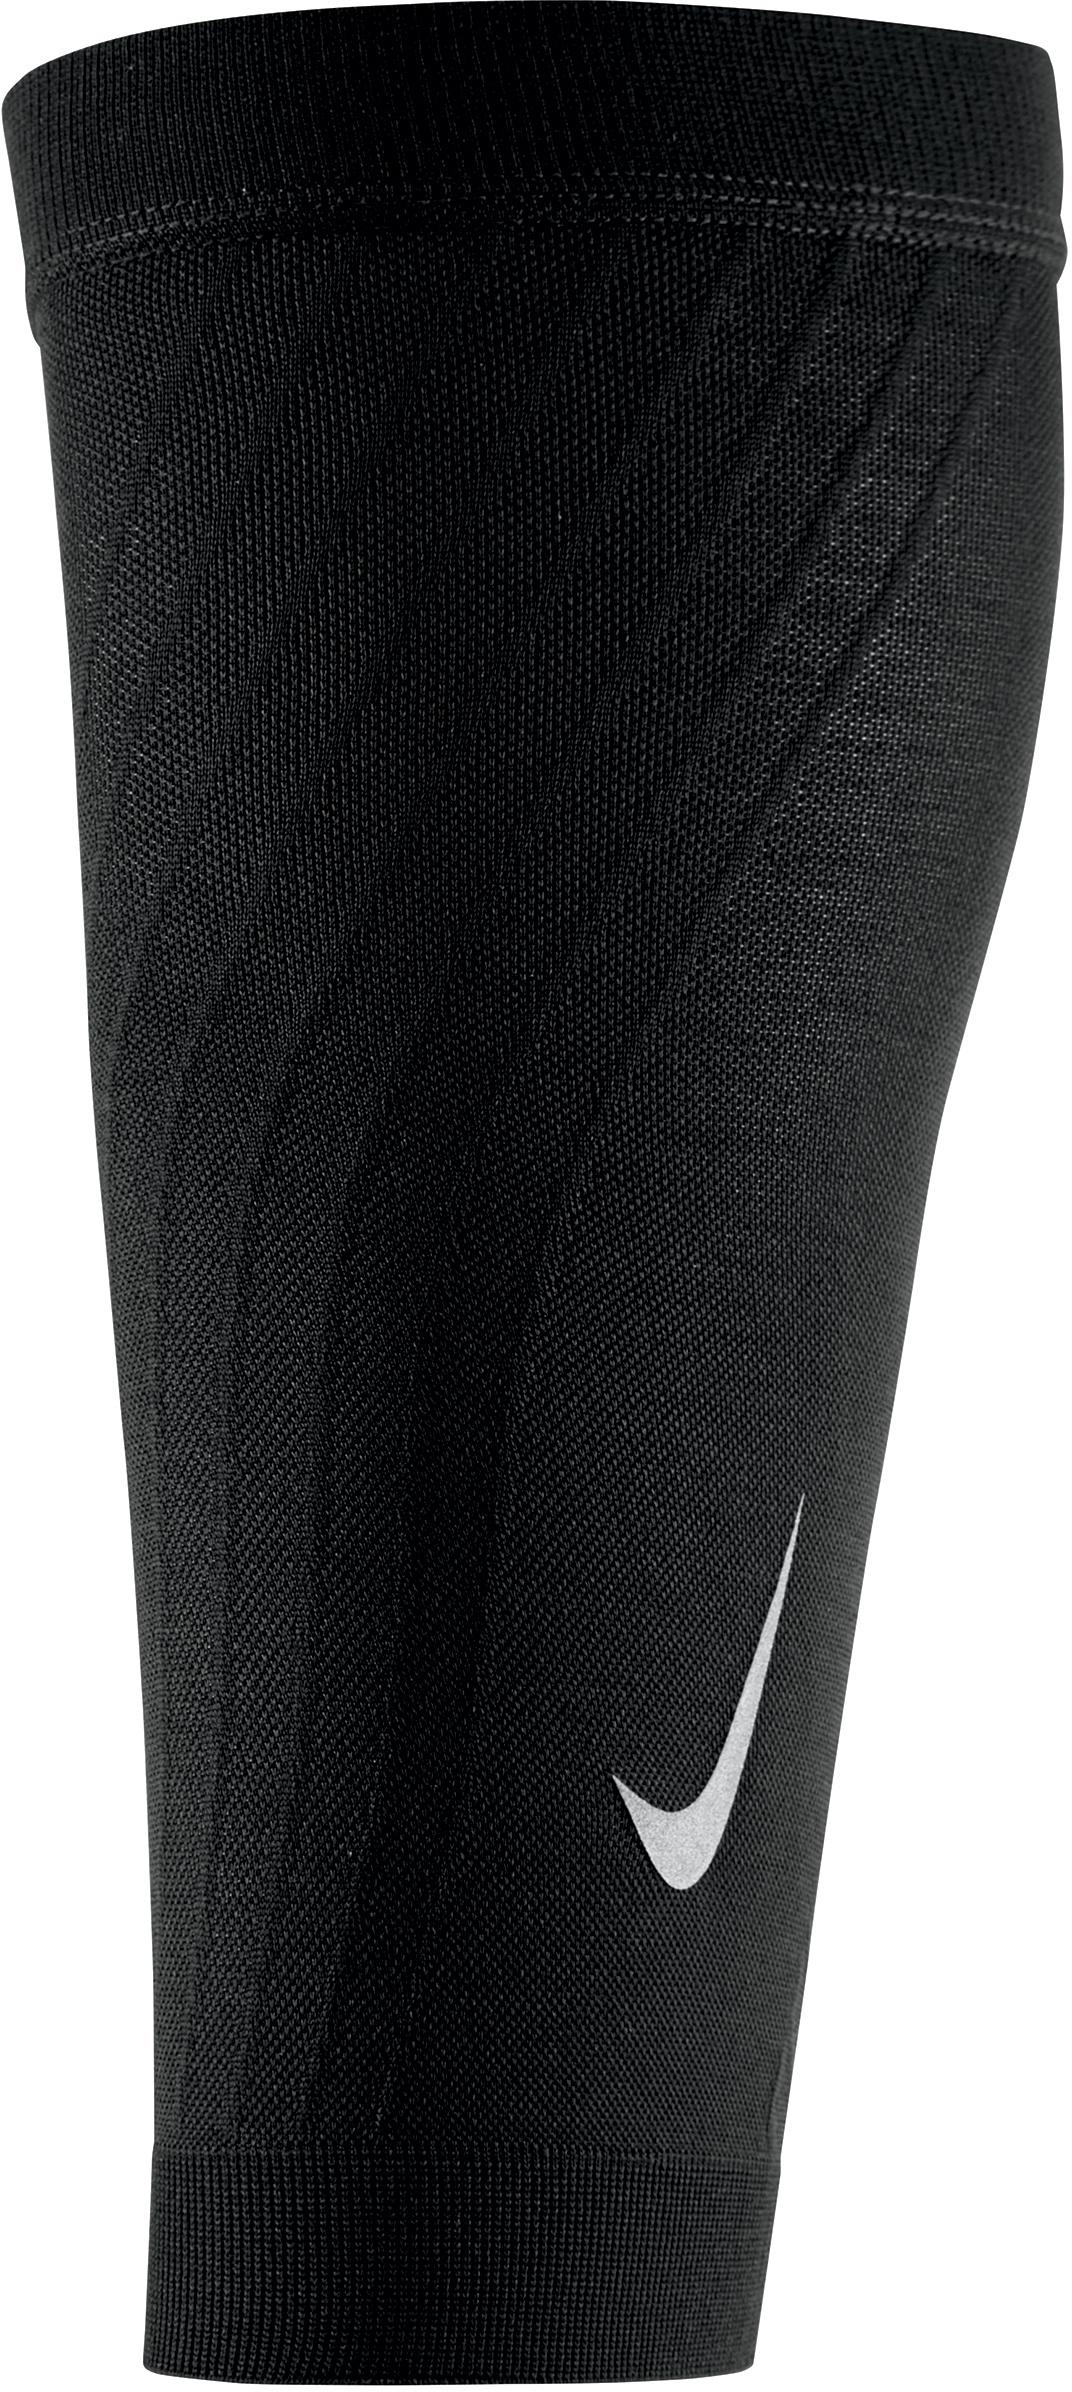 Nike Zoned Support Calf Sleeves - Black/silver